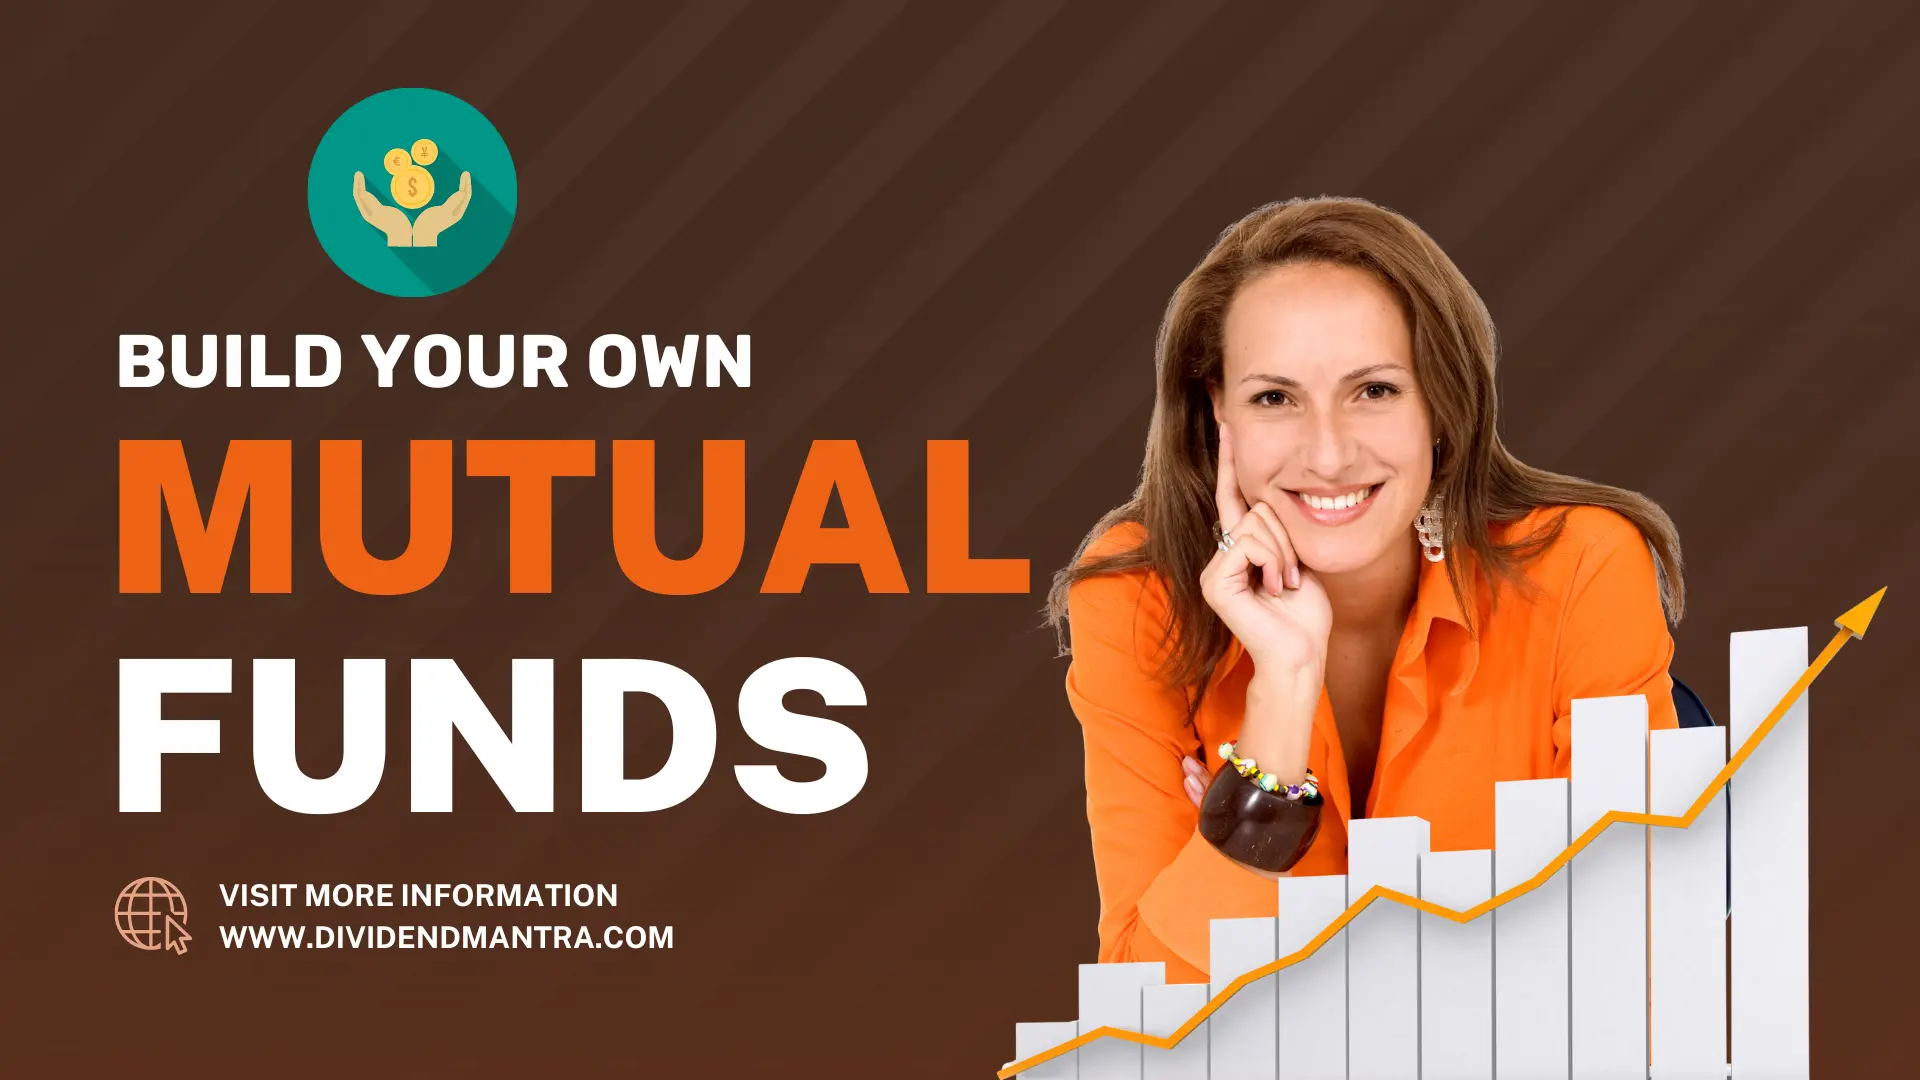 Build Your Own Mutual Fund